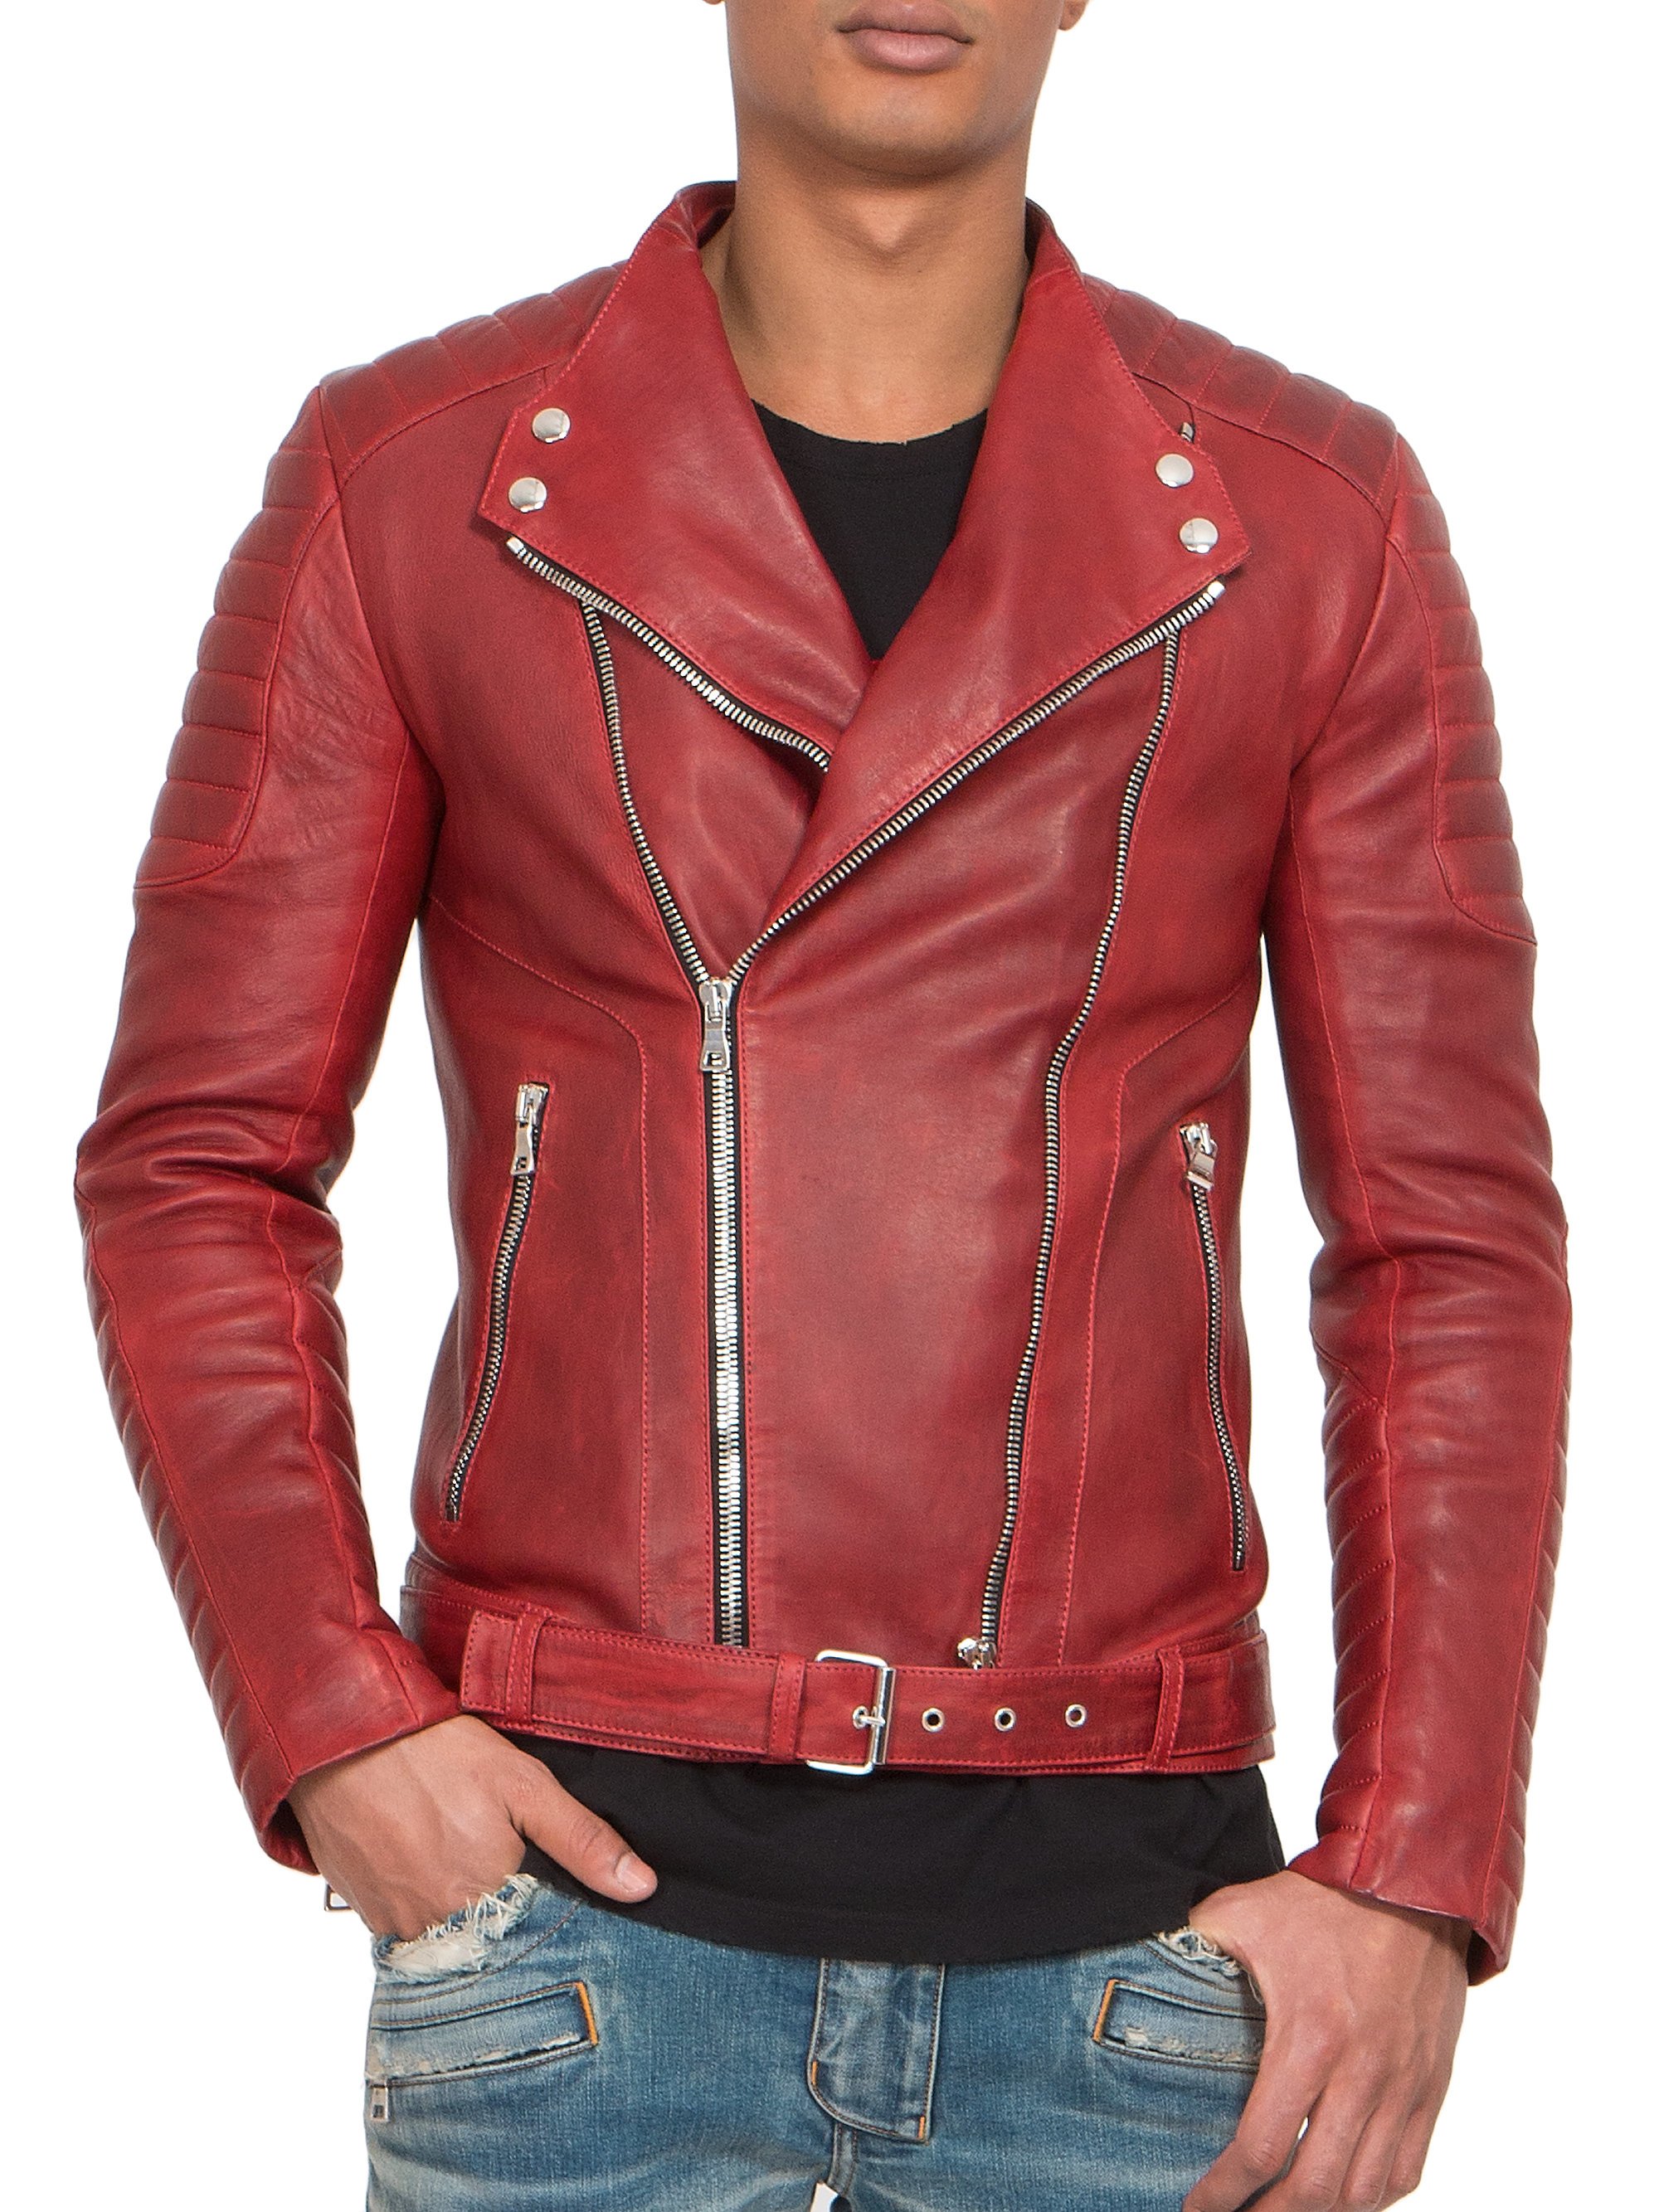 Lyst - Balmain Quilted Leather Biker Jacket in Red for Men